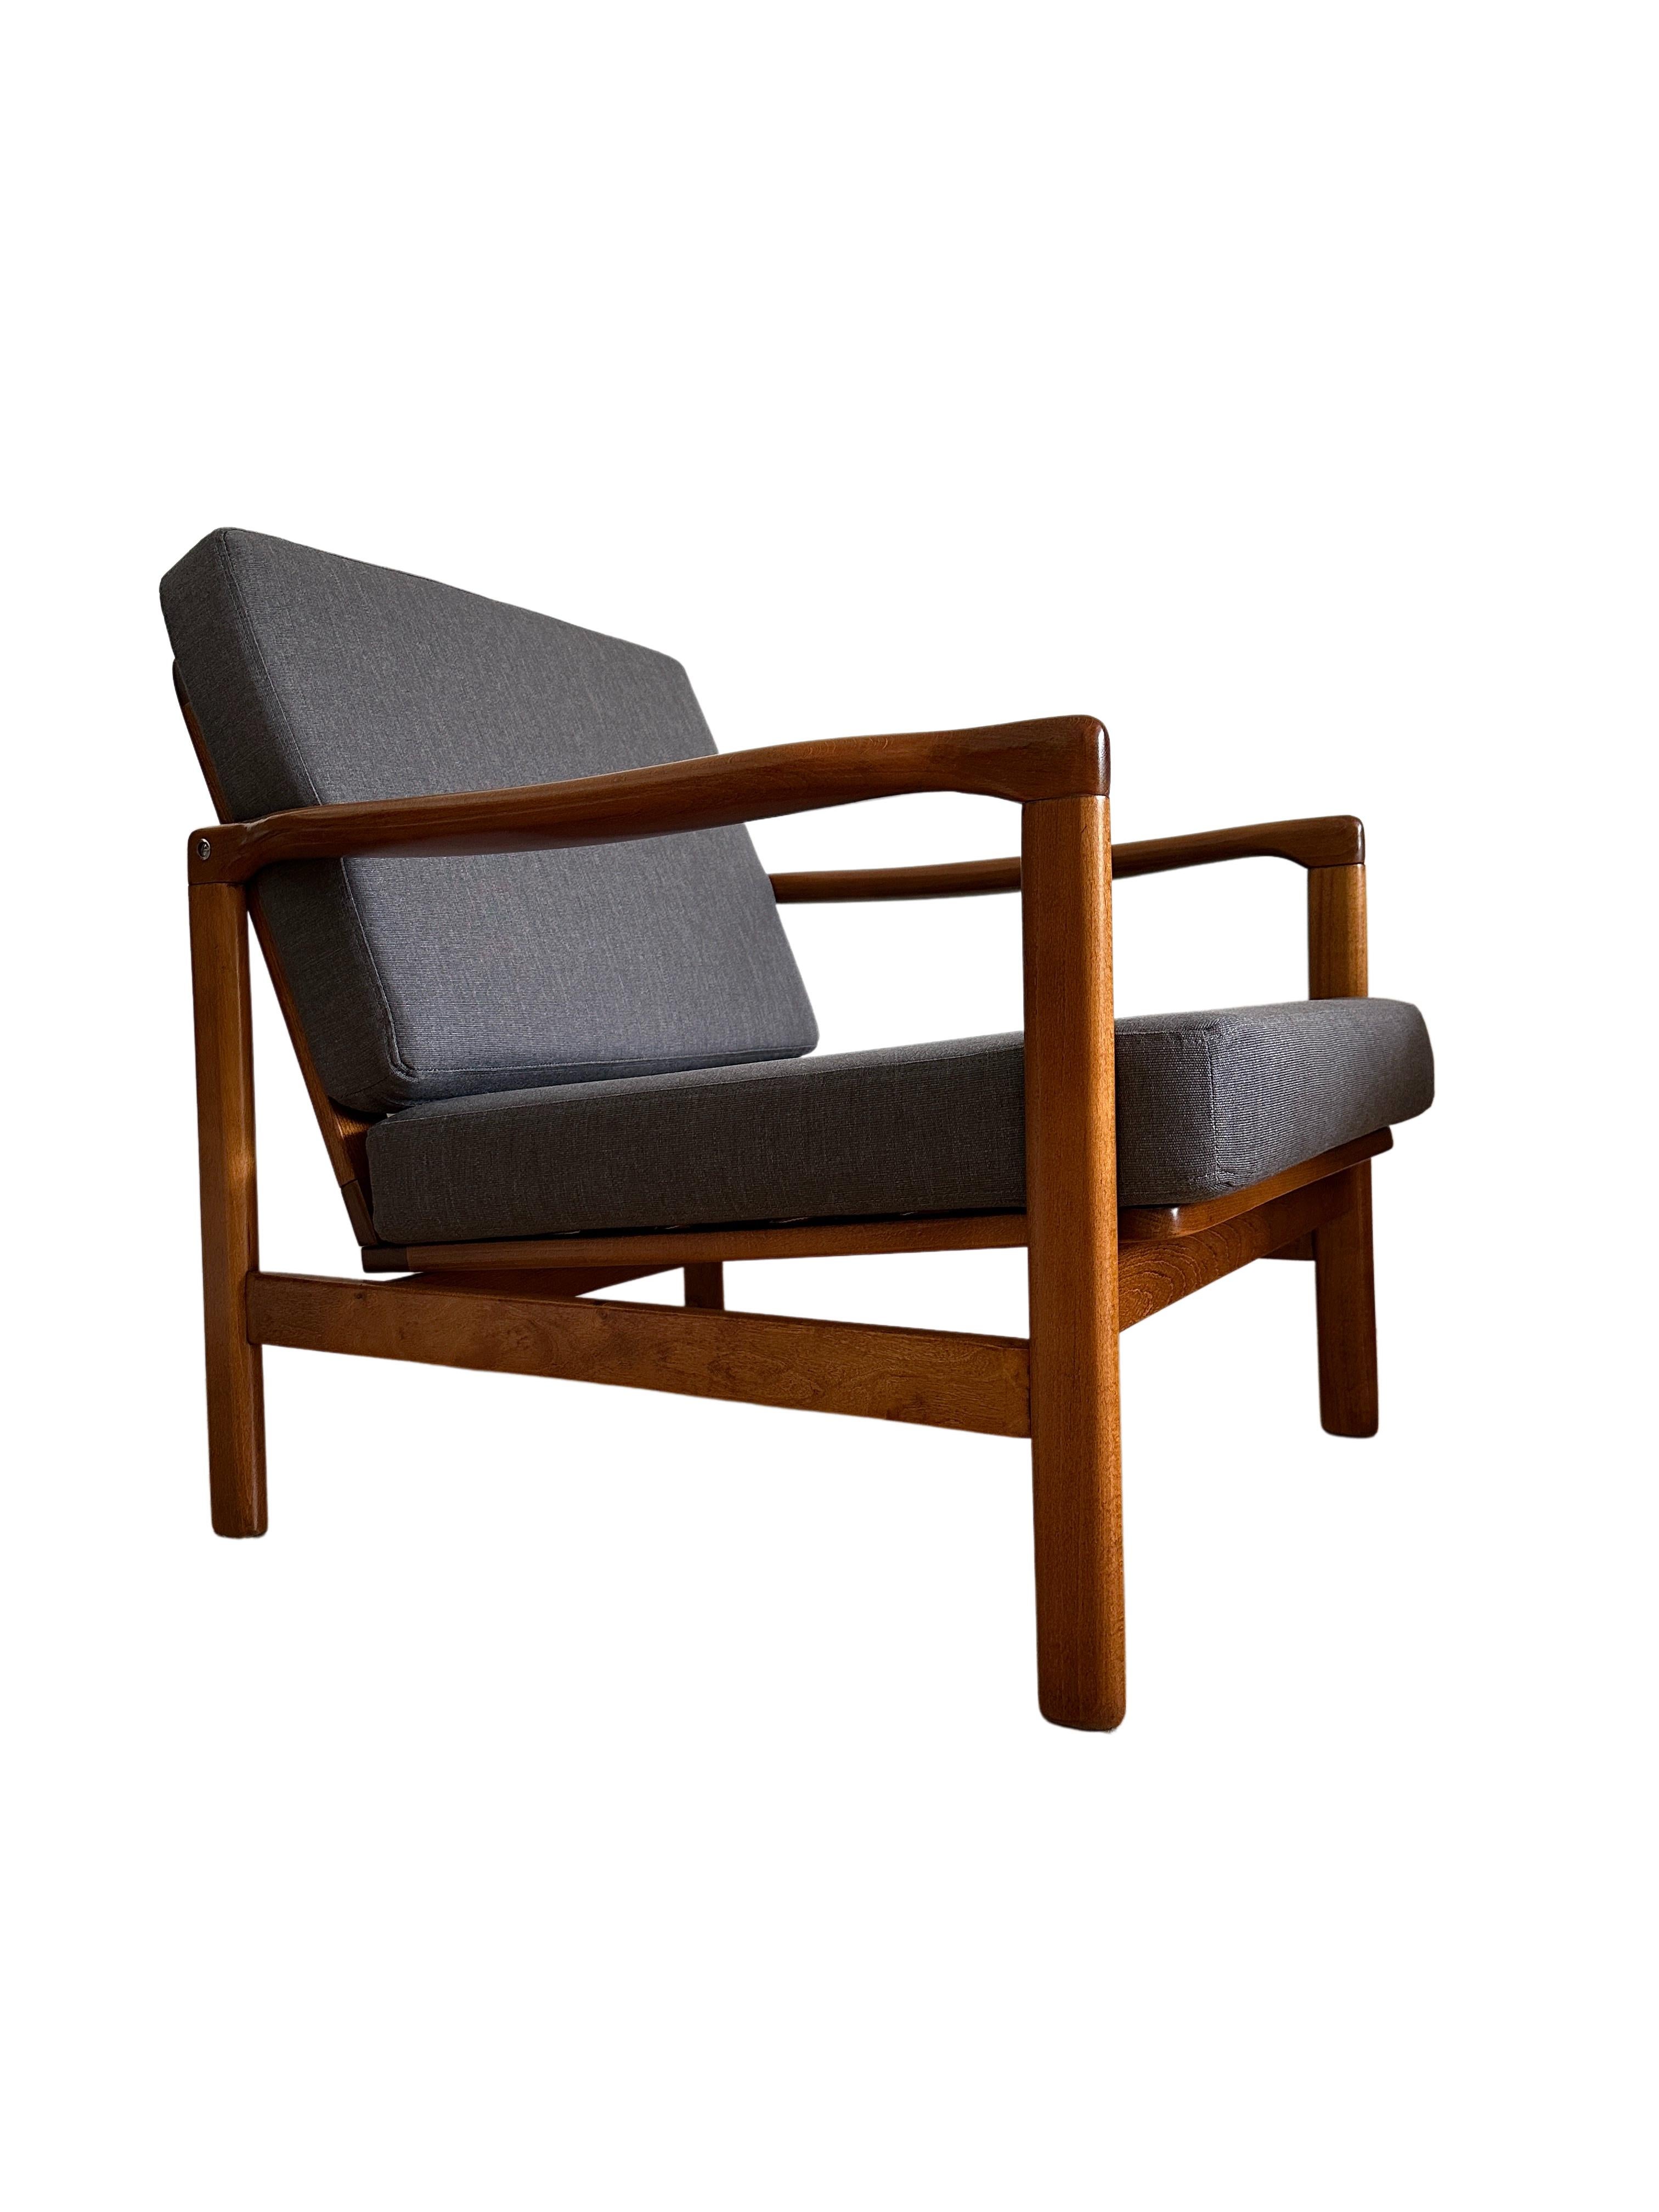 Hand-Crafted Mid-Century Armchair, Wood and Grey Kvadrat Upholstery, Europe, 1960s For Sale